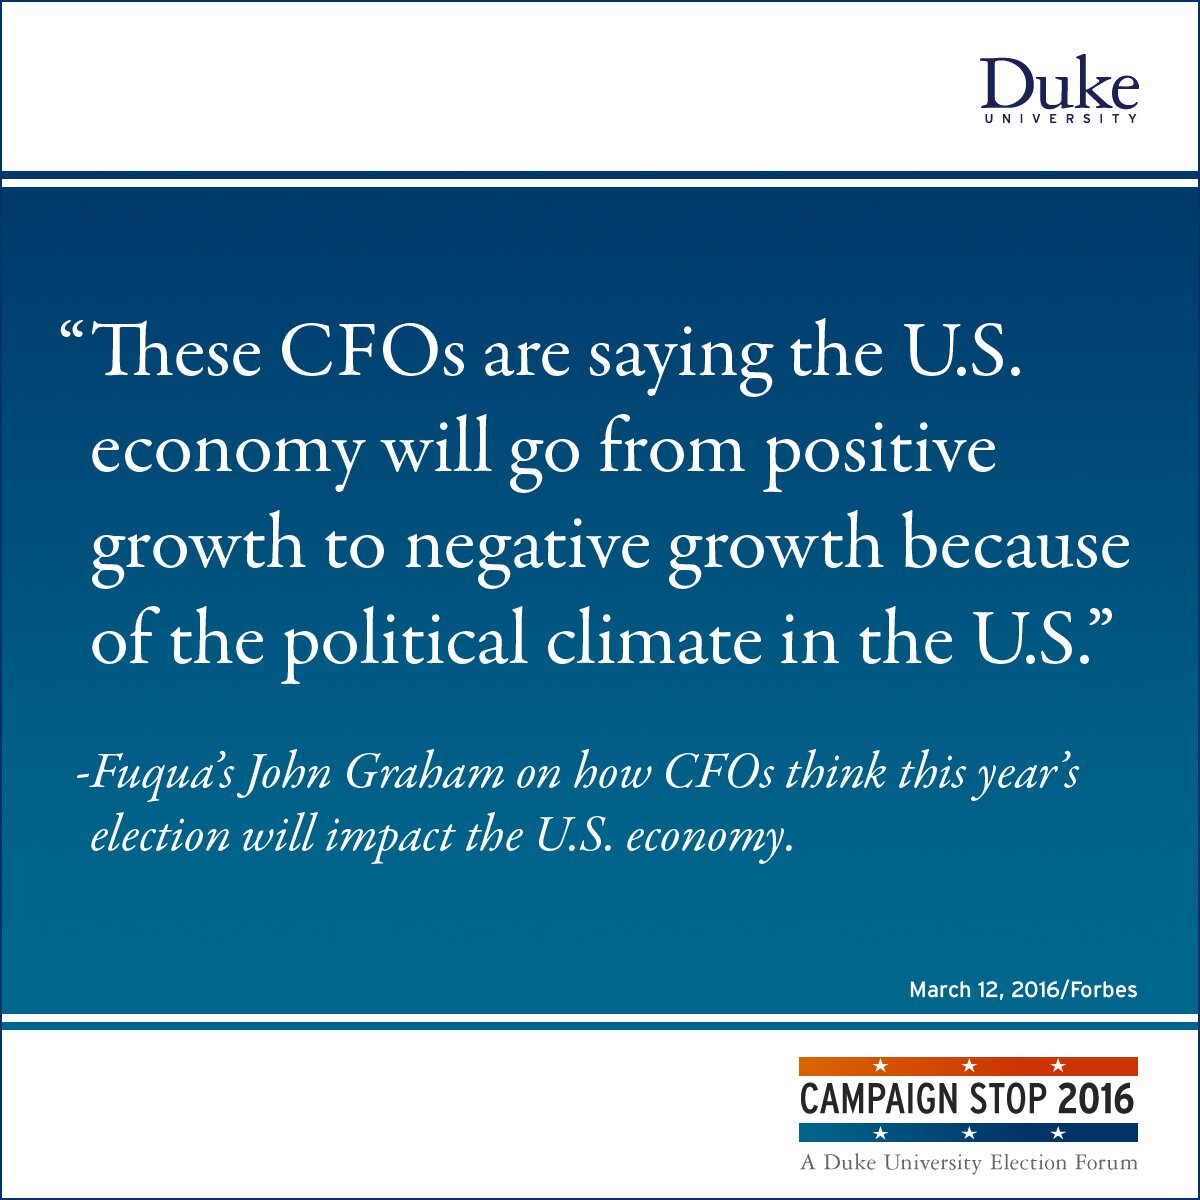 “These CFOs are saying the U.S. economy will go from positive growth to negative growth because of the political climate in the U.S.” -Fuqua’s John Graham on how CFOs think this year’s election will impact the U.S. economy.